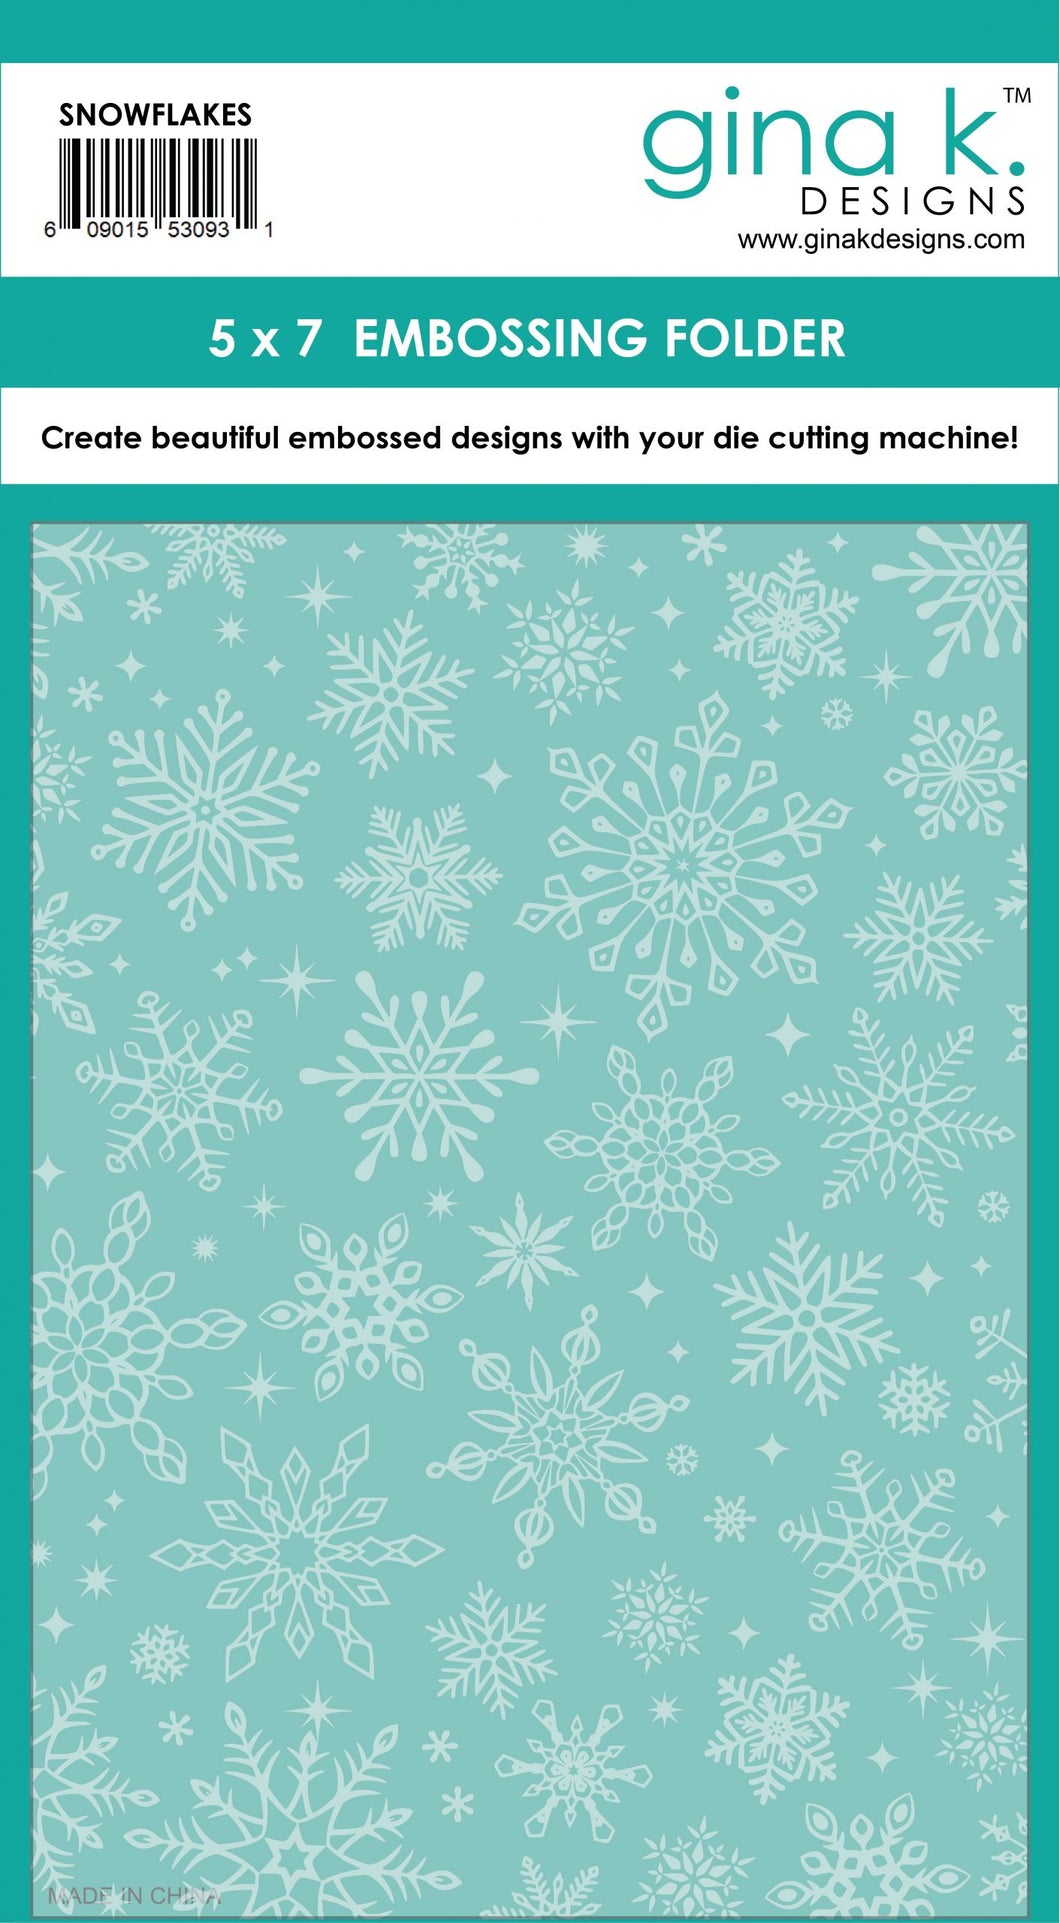 Gina K. Designs - Embossing Folder - Snowflakes. The embossing folders create deeply etched designs for a truly dimensional effect. They can also be used for a verity of fun cardmaking techniques. Embossing folders measure 5 x 7 inches. Available at Embellish Away located in Bowmanville Ontario Canada.